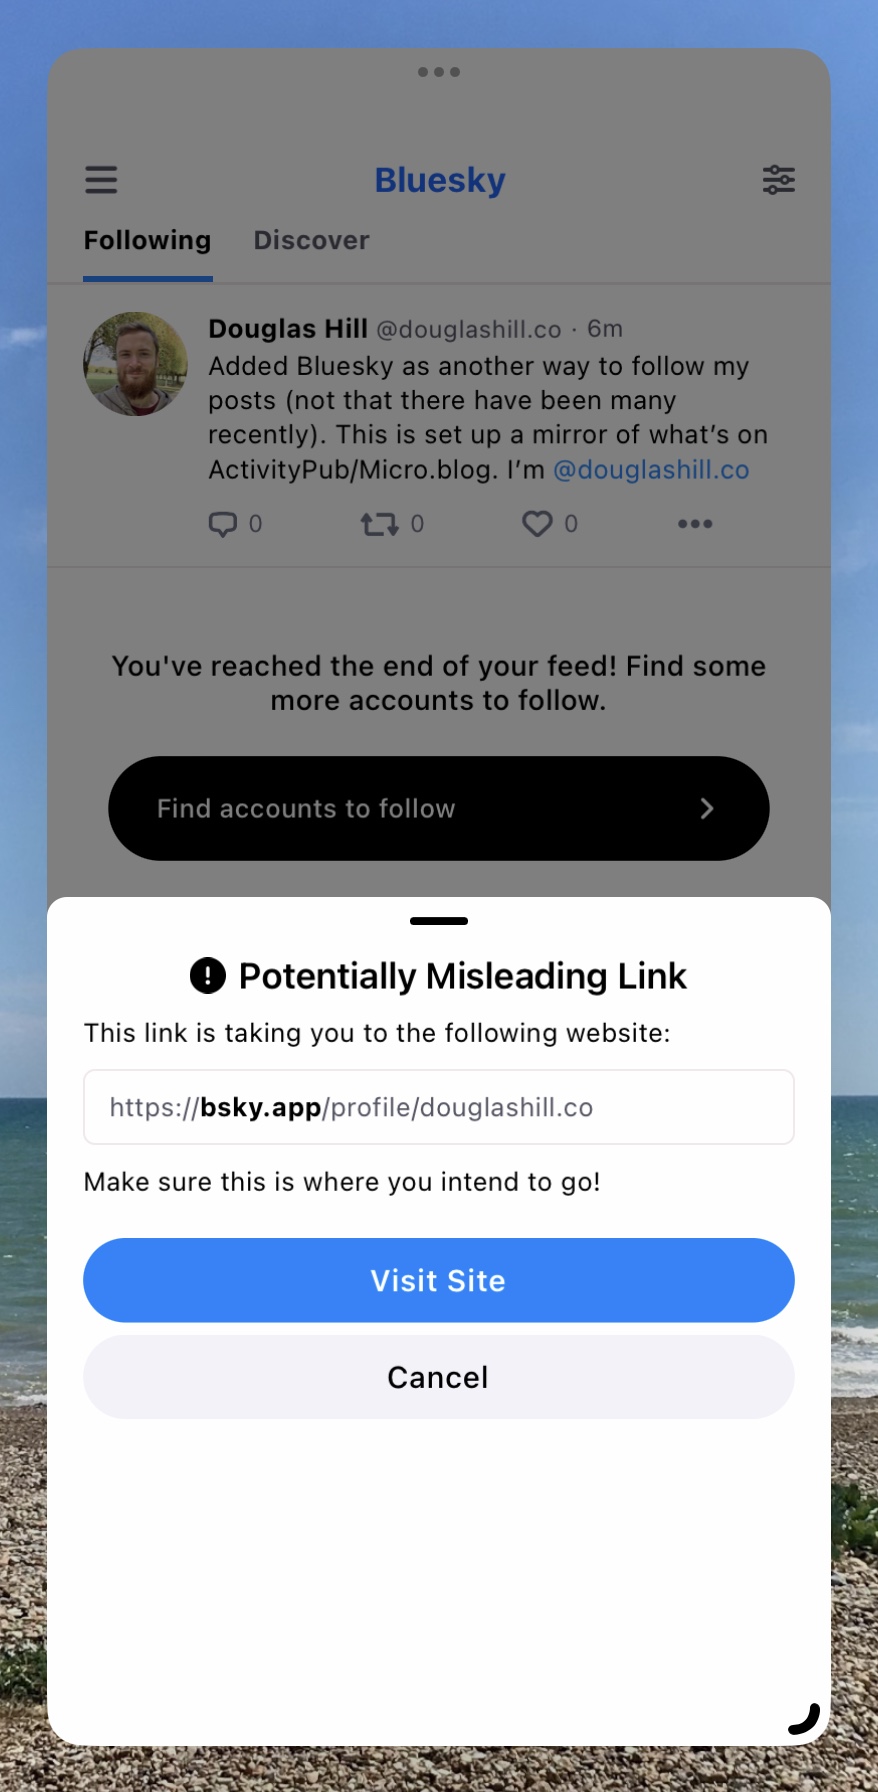 Screenshot of Bluesky app showing alert: Potentially Misleading Link; This link is taking you to the following website:; https://bsky.app/profile/douglashill.co; Make sure this is where you intend to go; Visit Site; Cancel